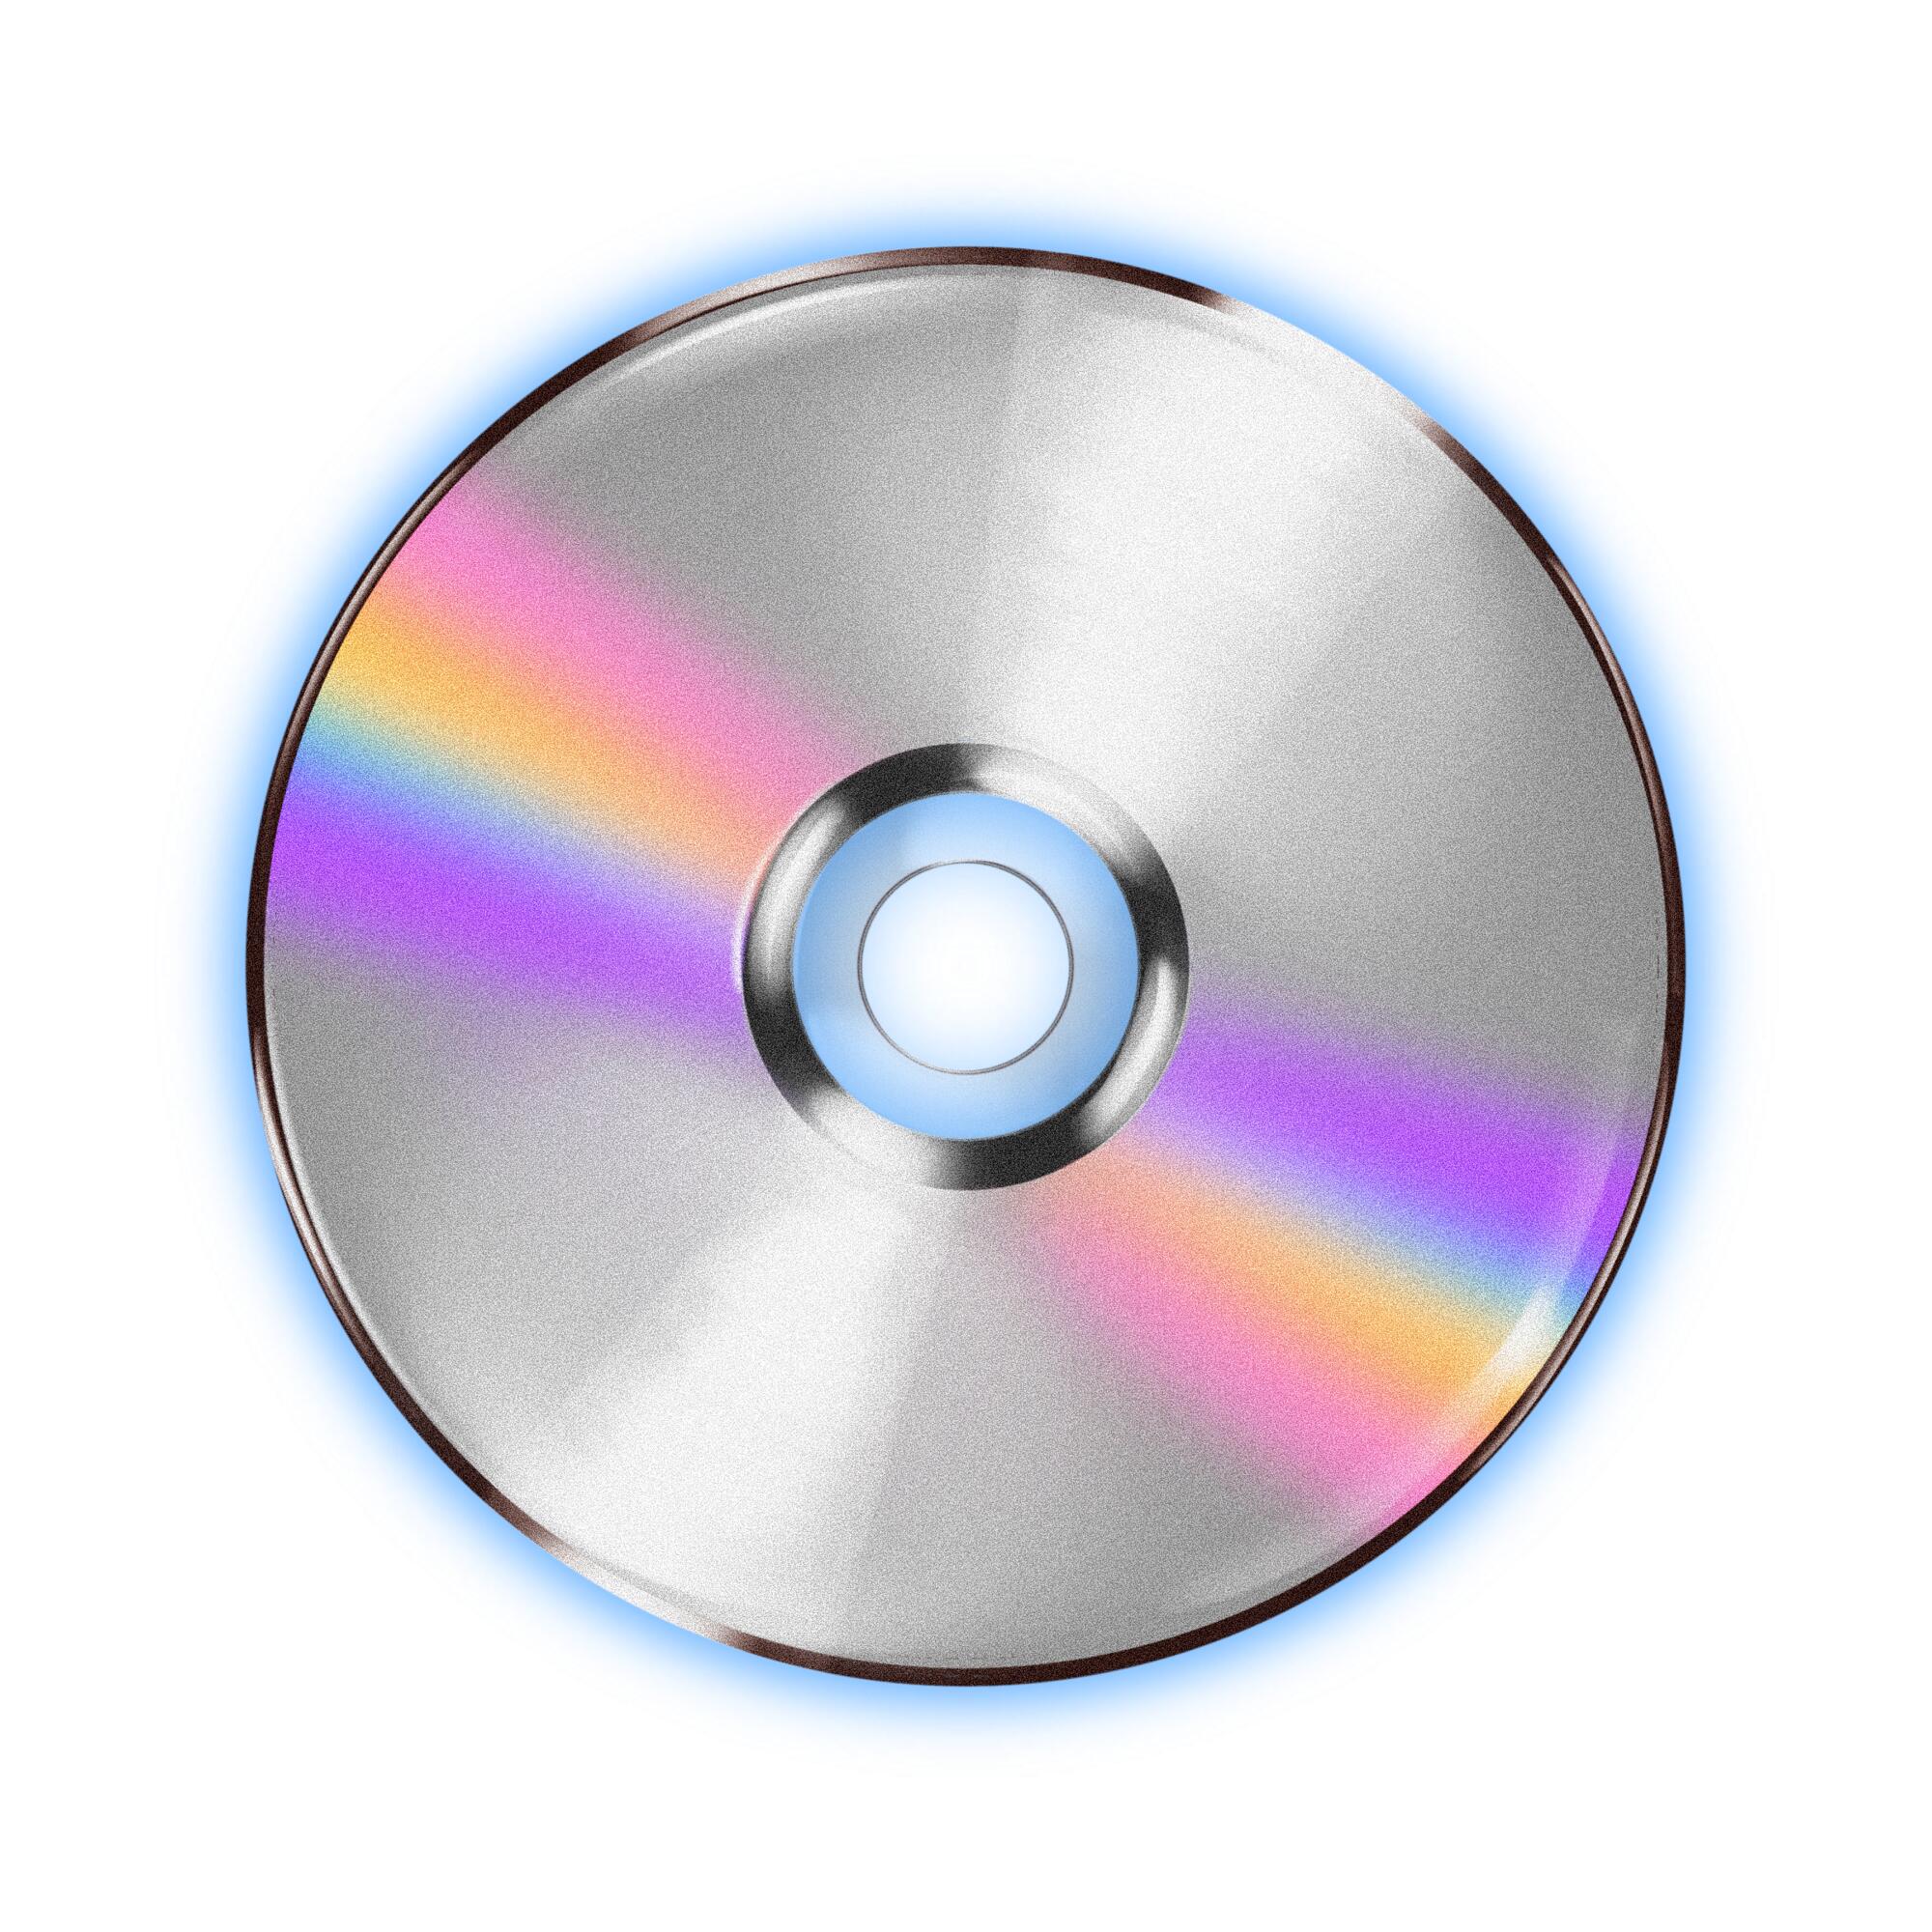 Illustration of a silver CD with rainbow colors